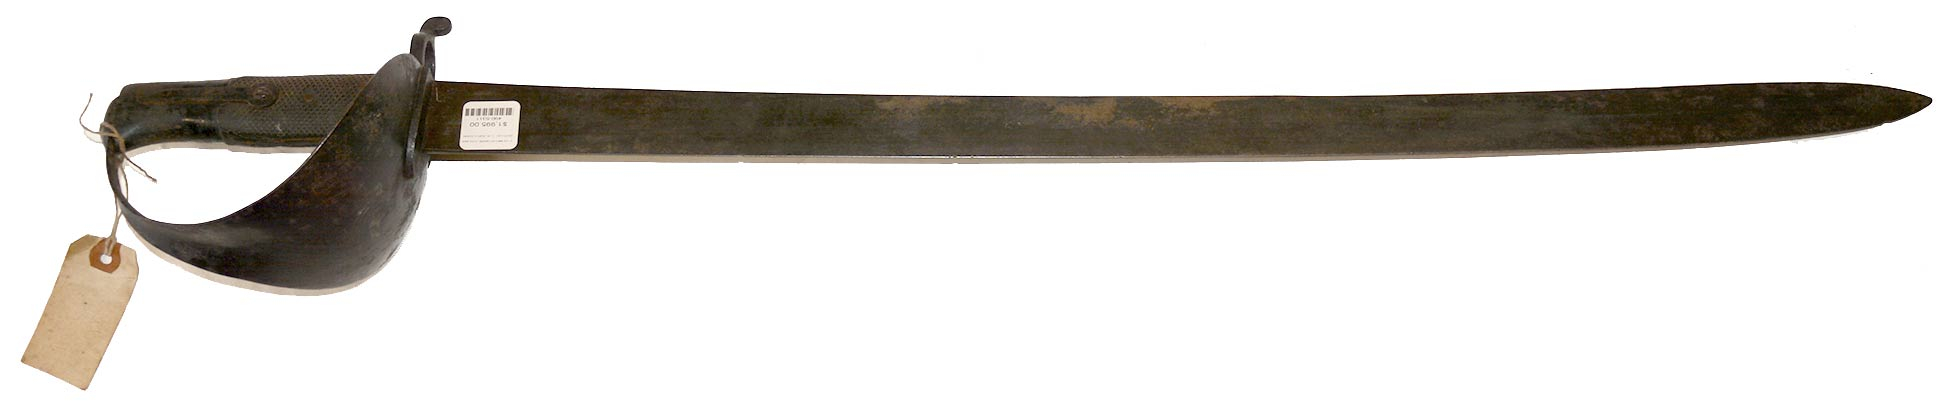 VERY SCARCE CONFEDERATE NAVY IMPORTED BRITISH 1859 PATTERN, TYPE-II, NAVAL CUTLASS BAYONET WITH CONTROL NUMBERS 